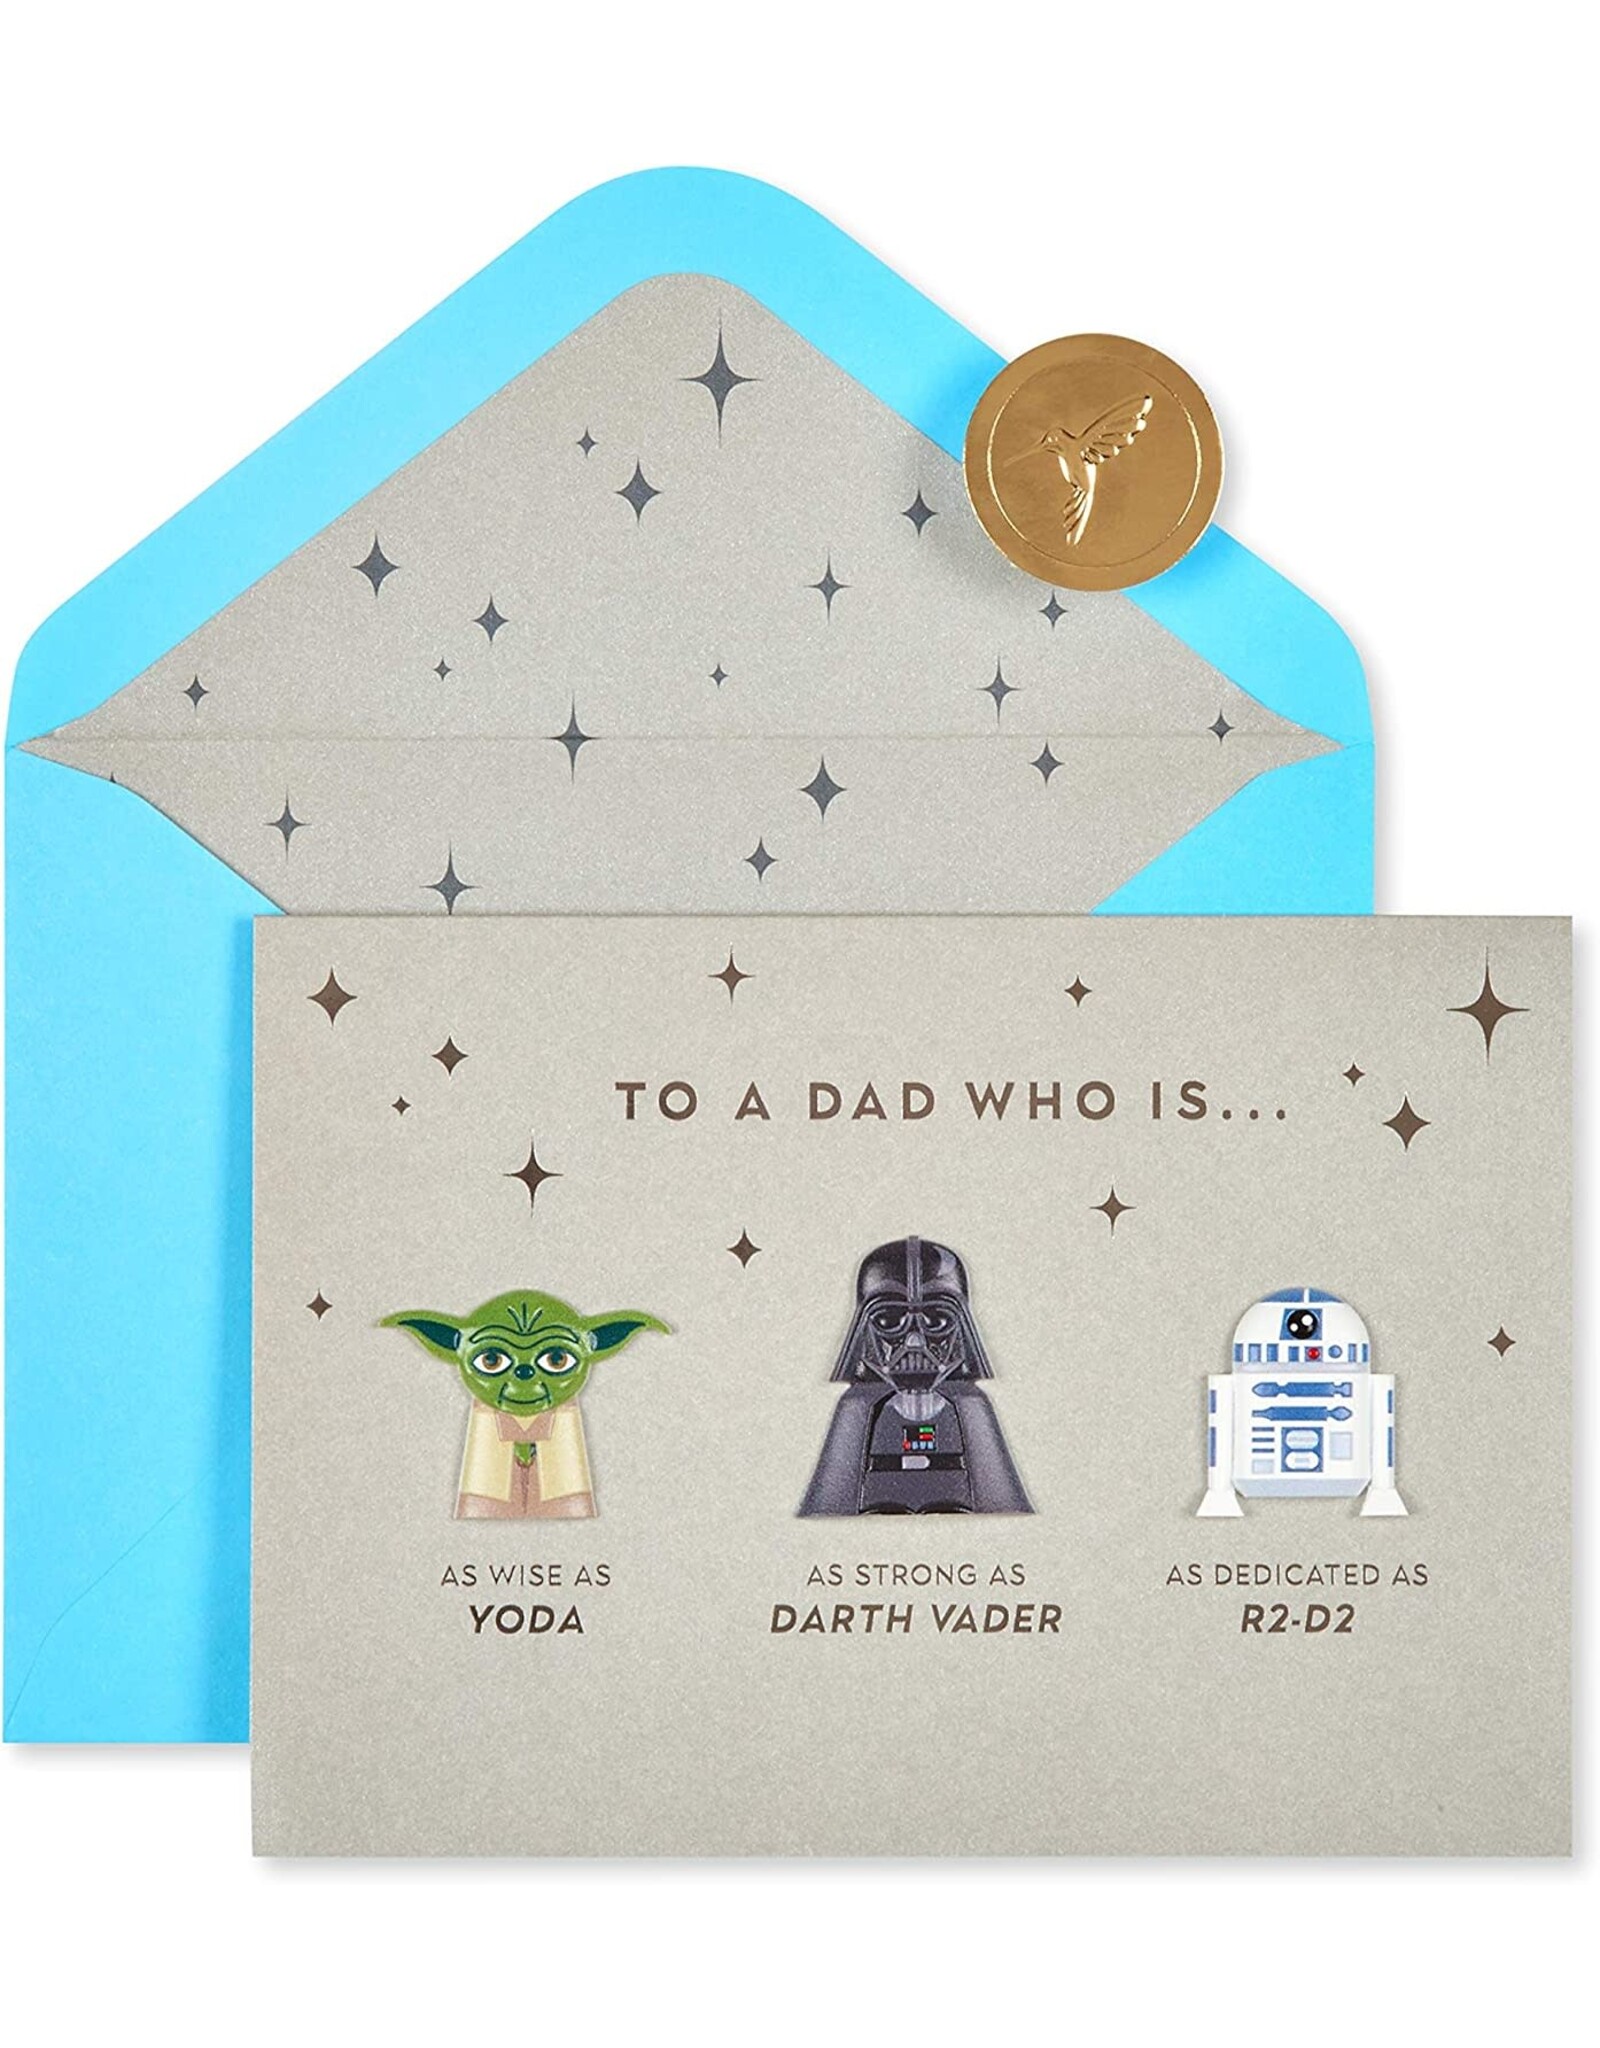 PAPYRUS® Father's Day Cards Star Wars Card Best Dad In The Galaxy